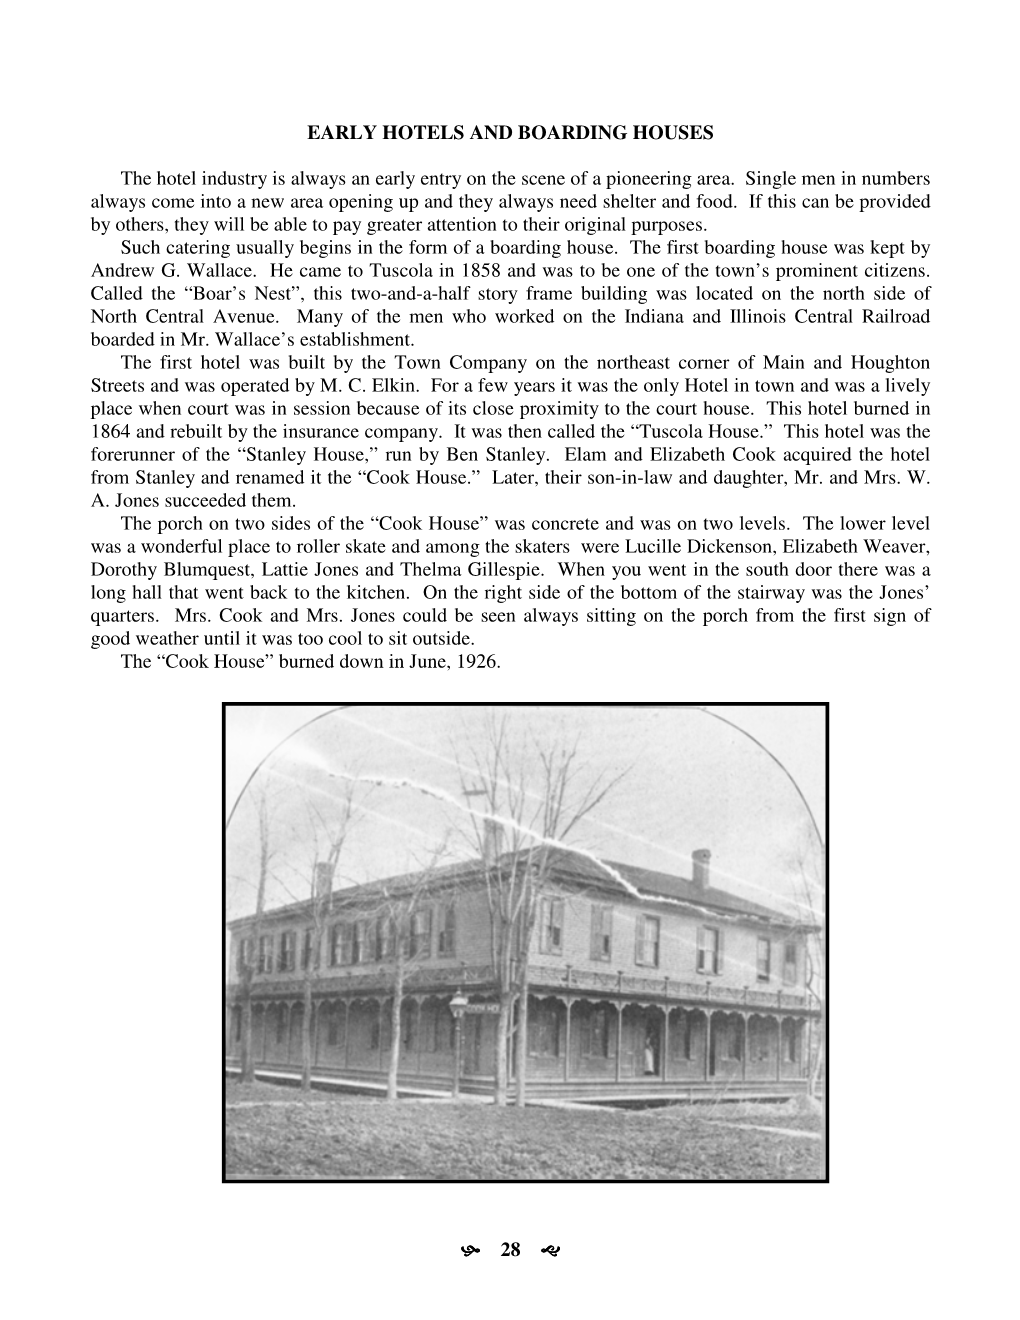 Early Hotels and Boarding Houses